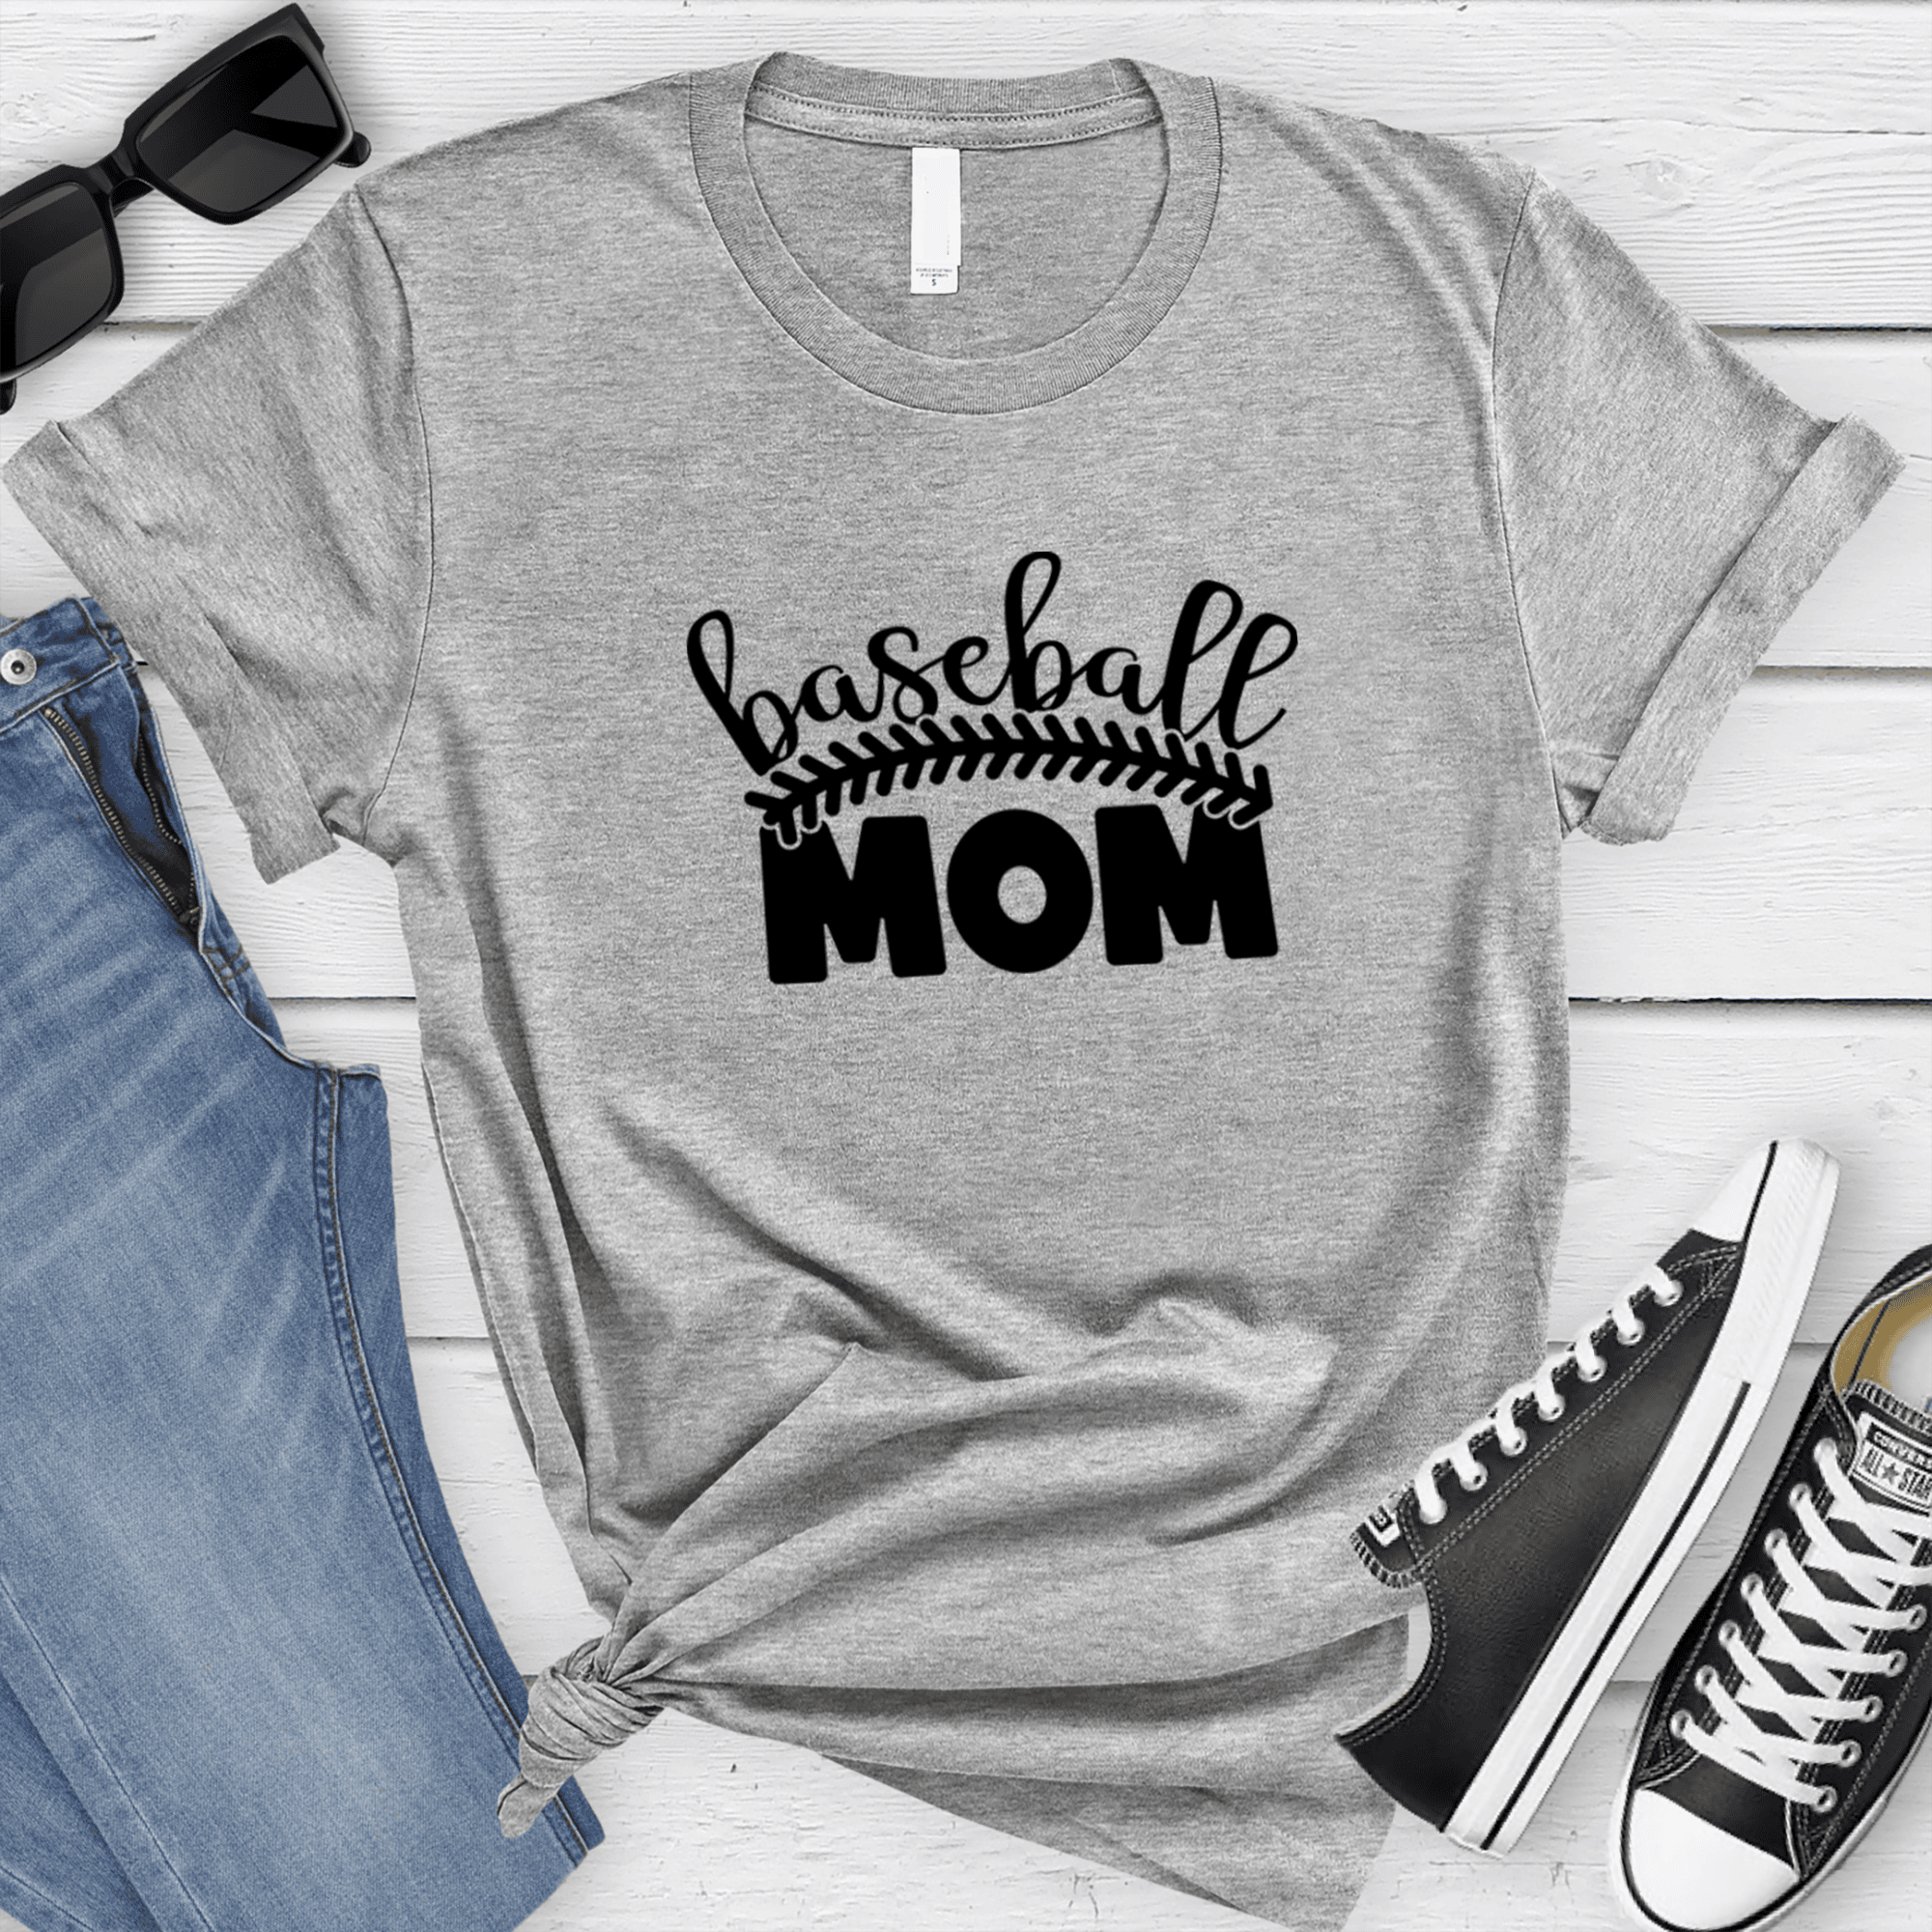 Womens Grey T Shirt with Stitched-Baseball-Mom design